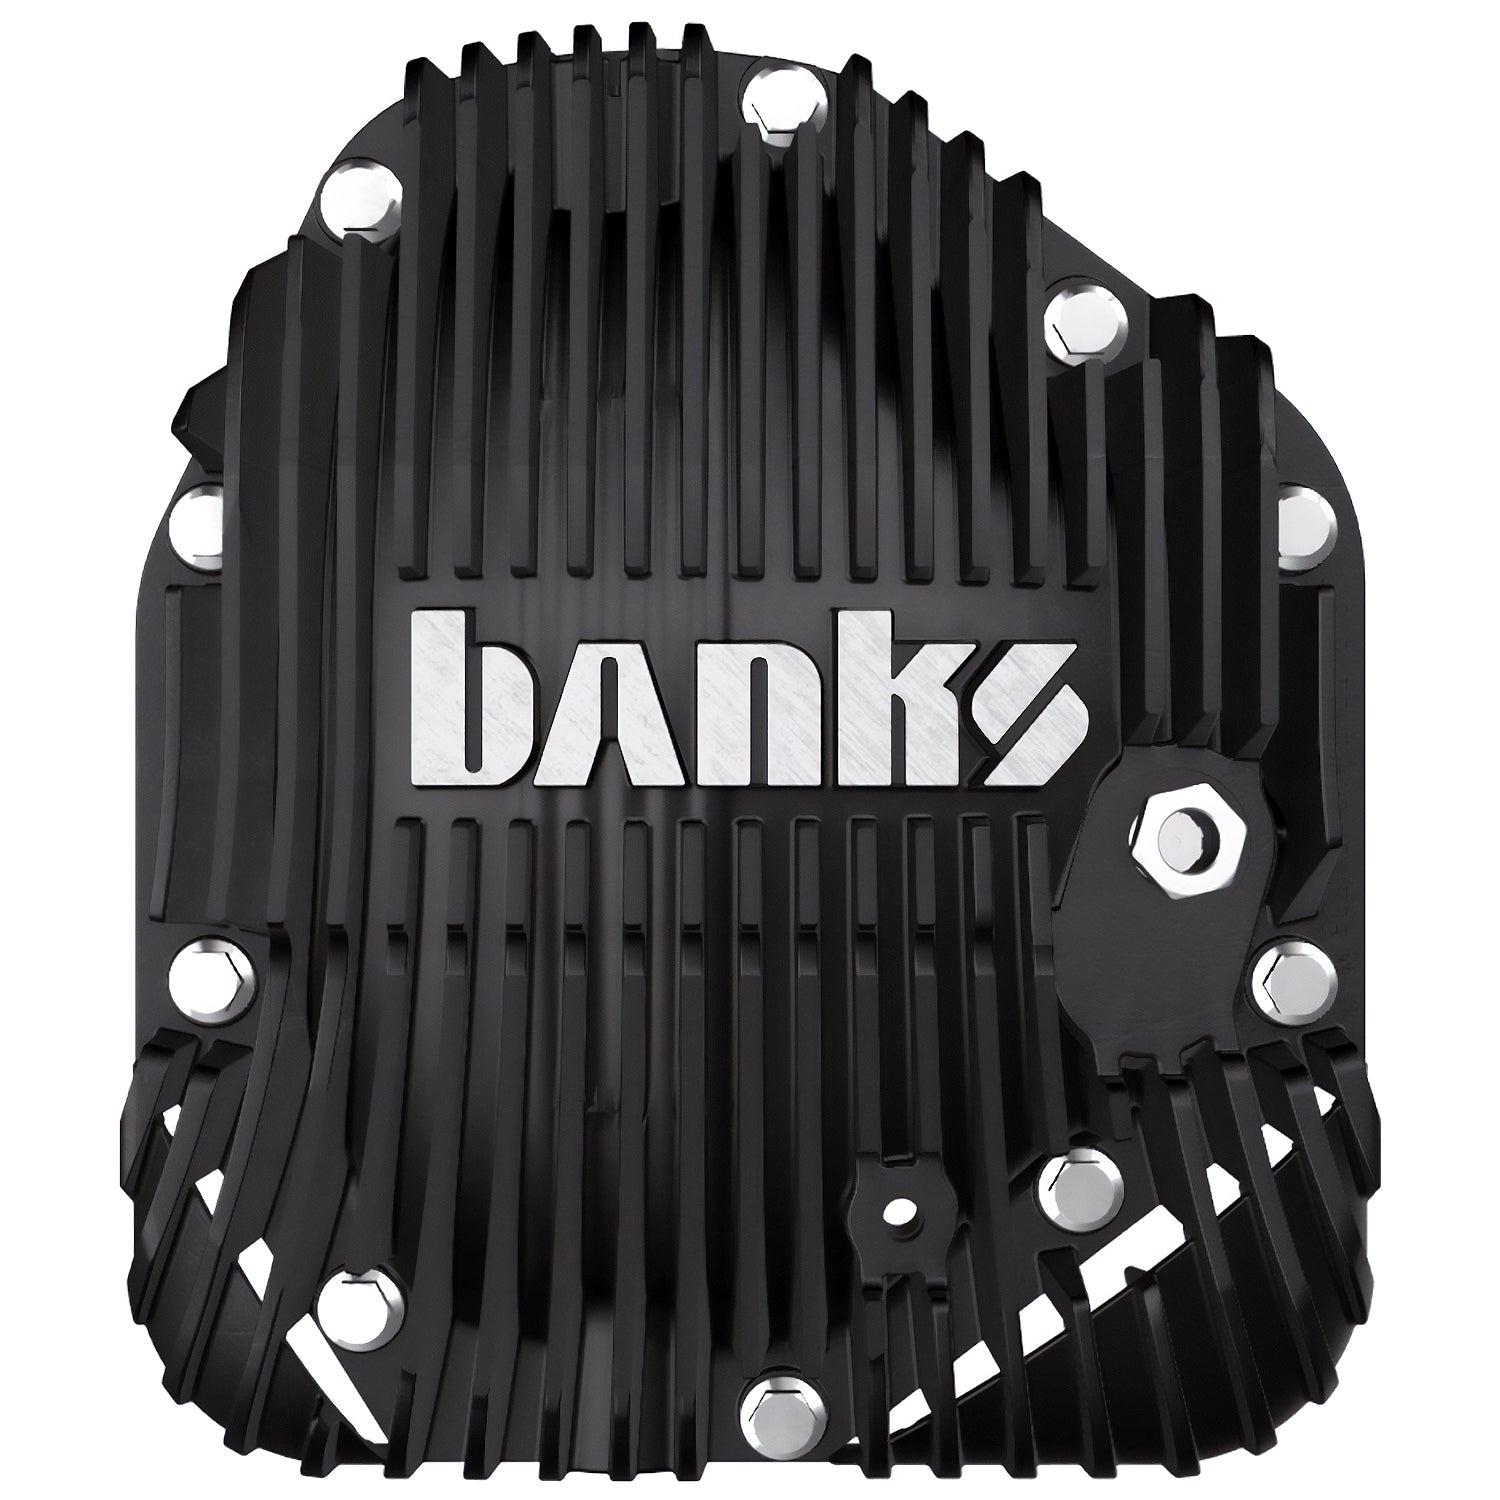 CAD Render of Dana 80 Ram-Air Differential Cover in Black Ops Finish